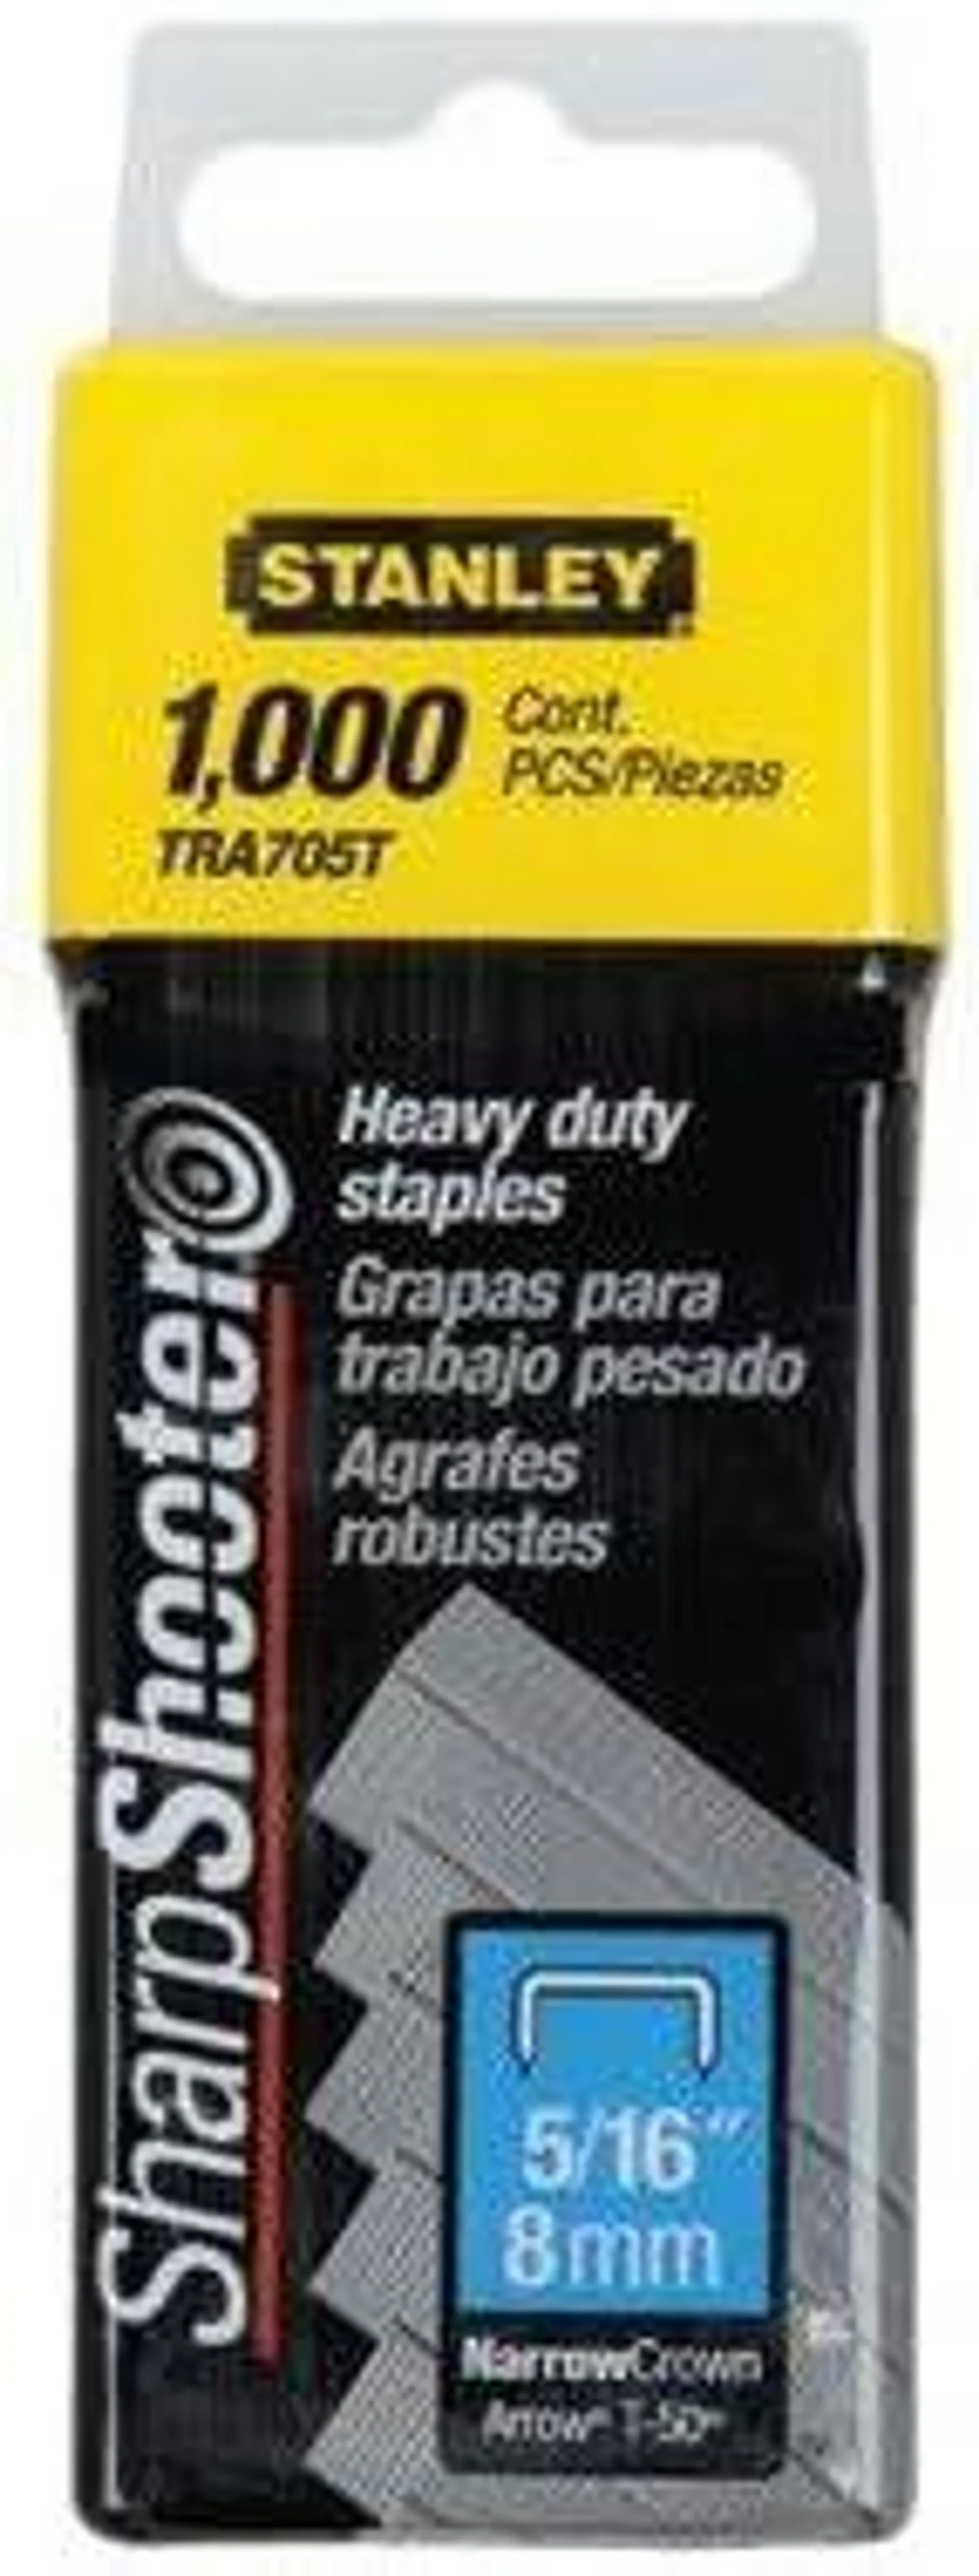 Stanley Tools TRA705T 5/16in. Heavy Duty Staple 2 Pack